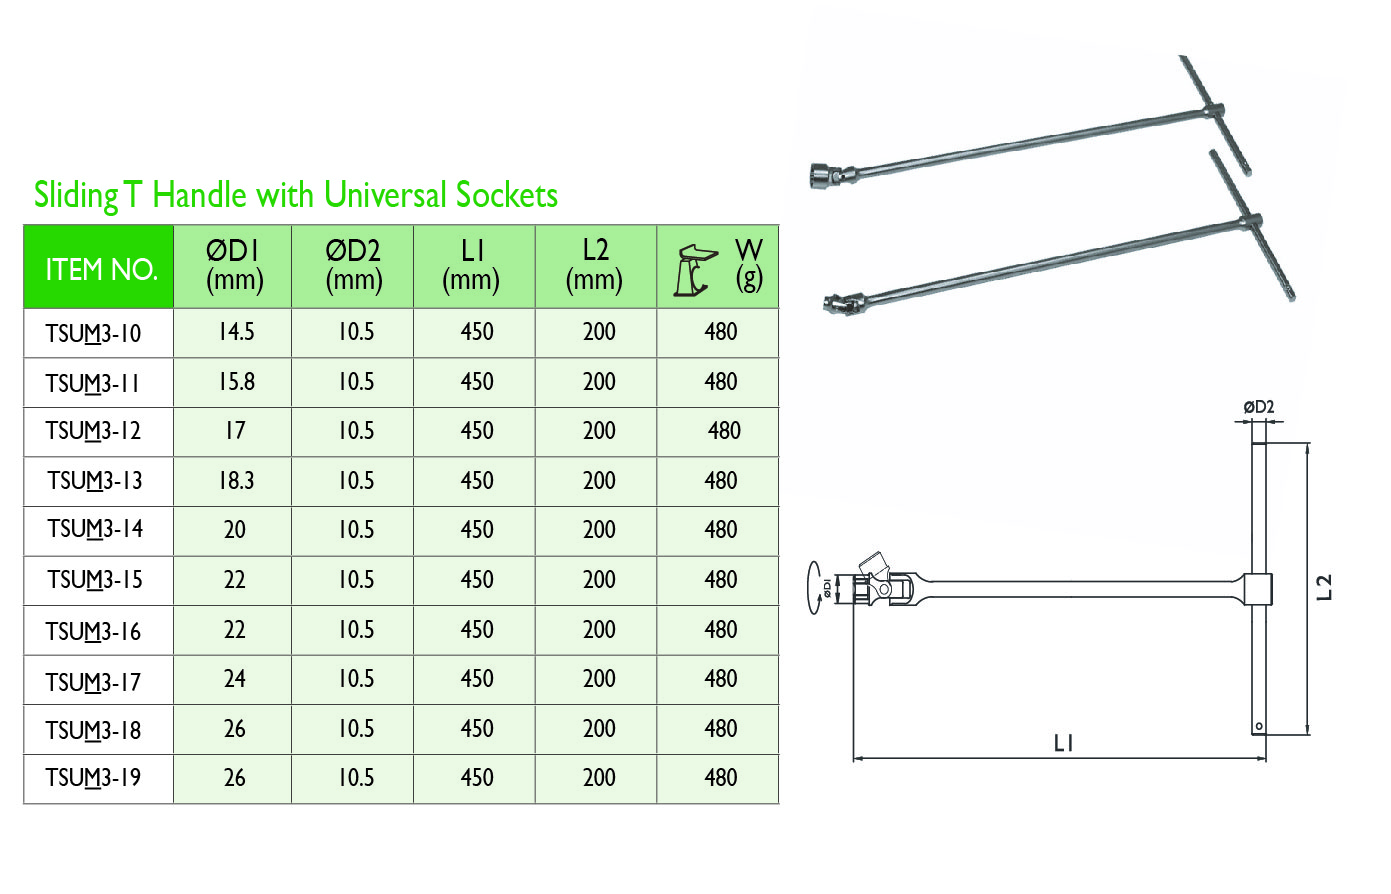 3_38 Sliding T Handle with Universal Sockets_A.jpg